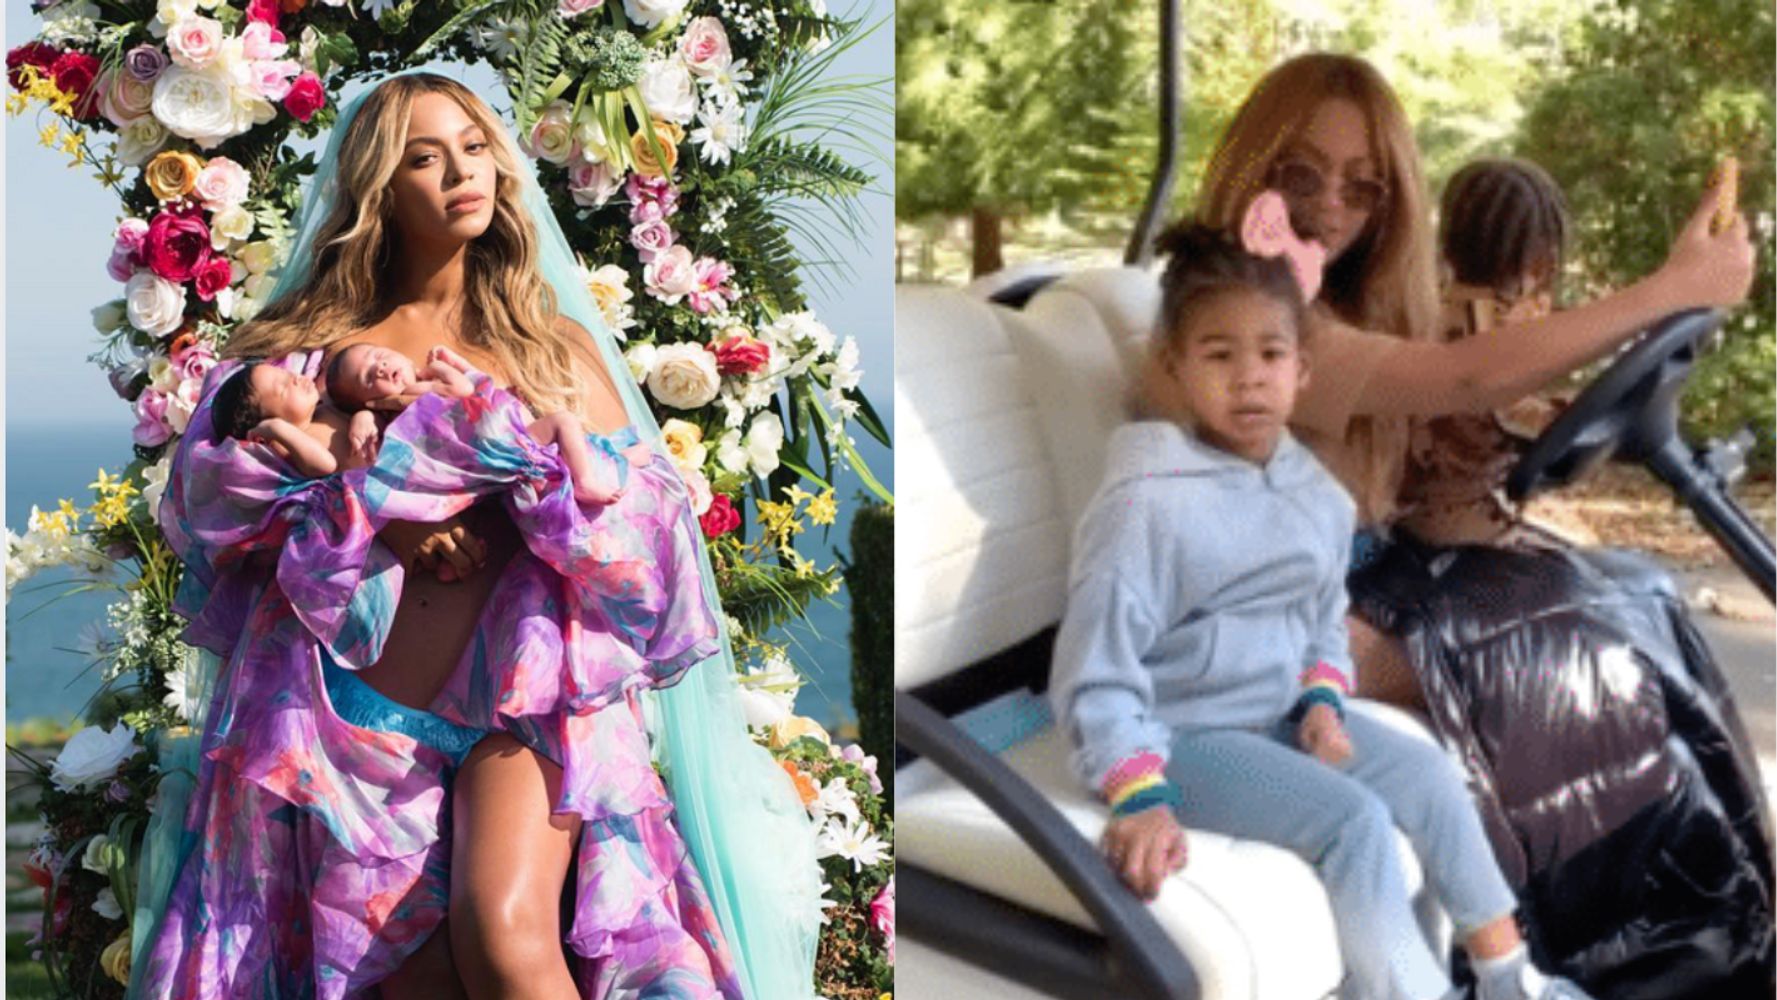 Beyoncé Shares Rare Glimpse Of Twins Rumi And Sir In NeverBeforeSeen